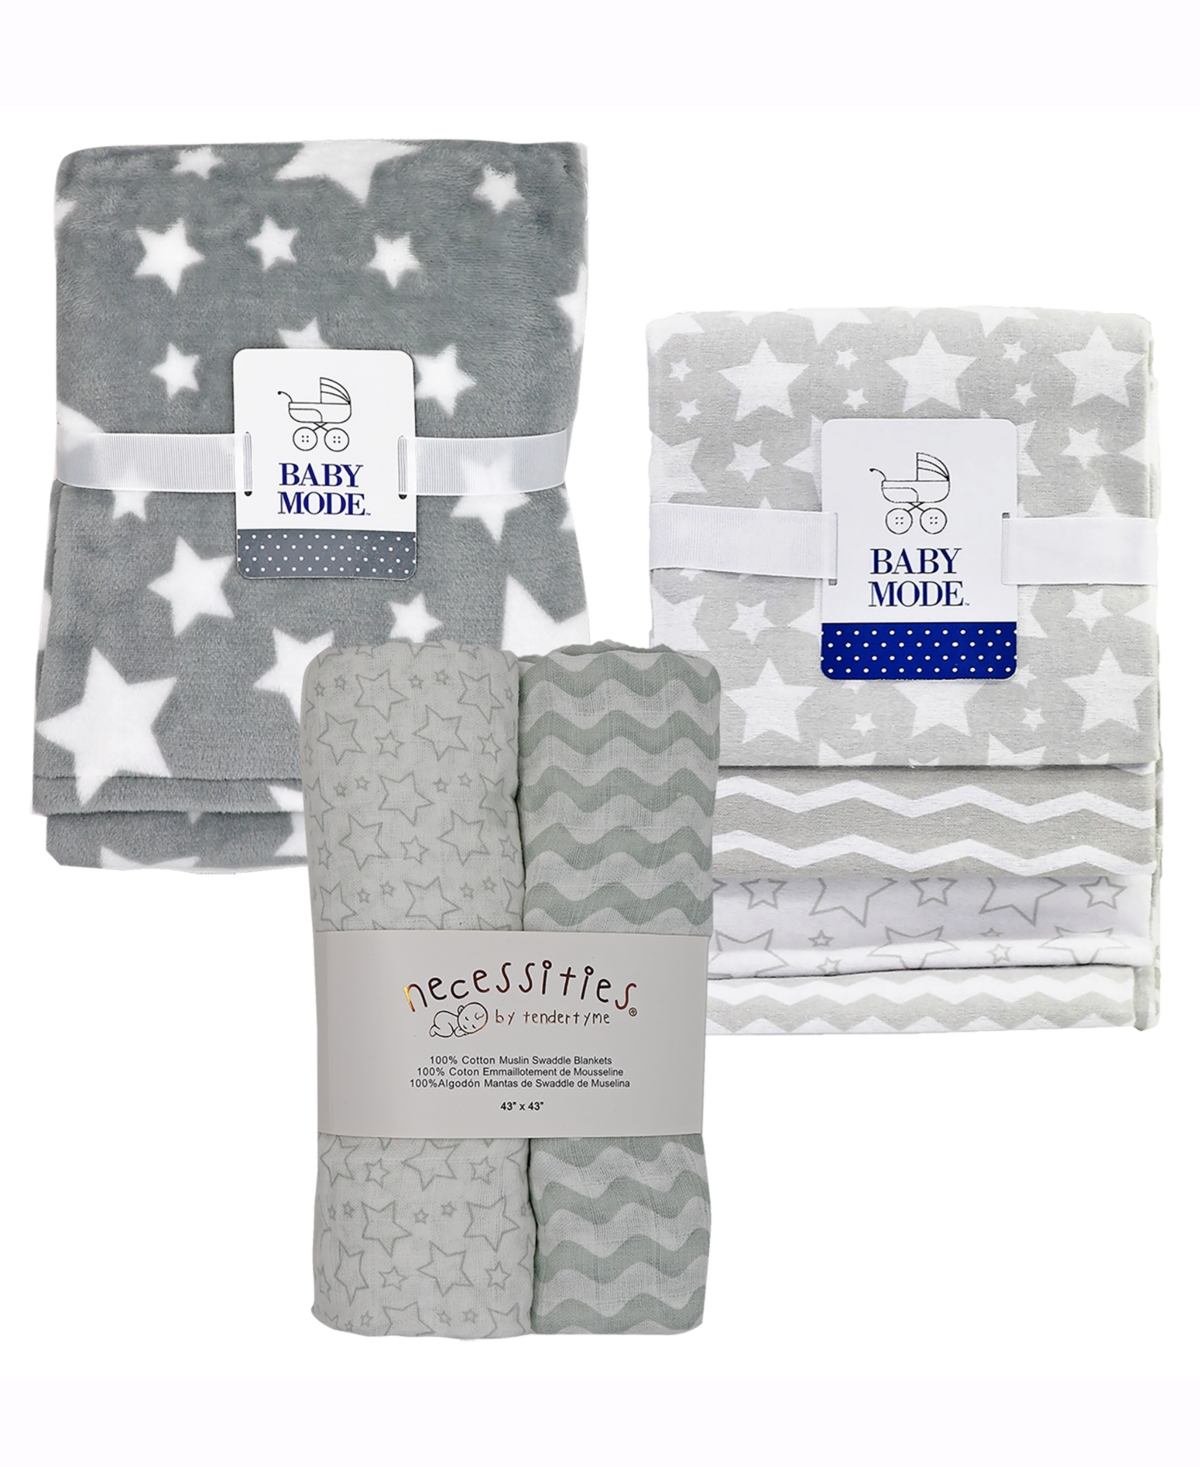 Tendertyme Baby Boys Or Baby Girls Stars Nursery Blanket Collection, 7 Piece Set In Gray And White